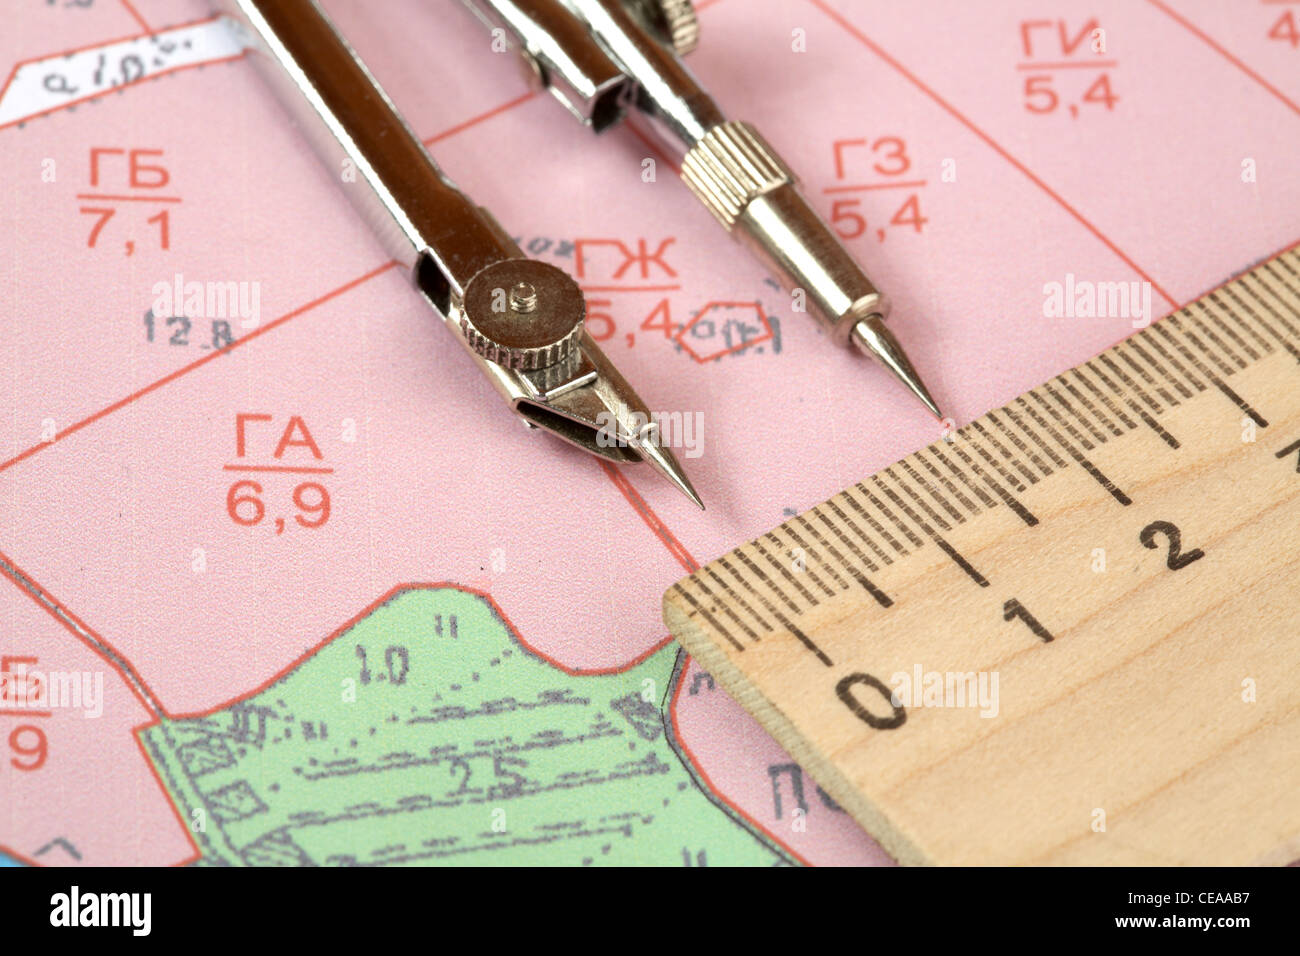 Topographic map of district with measuring instrument and ruler Stock Photo